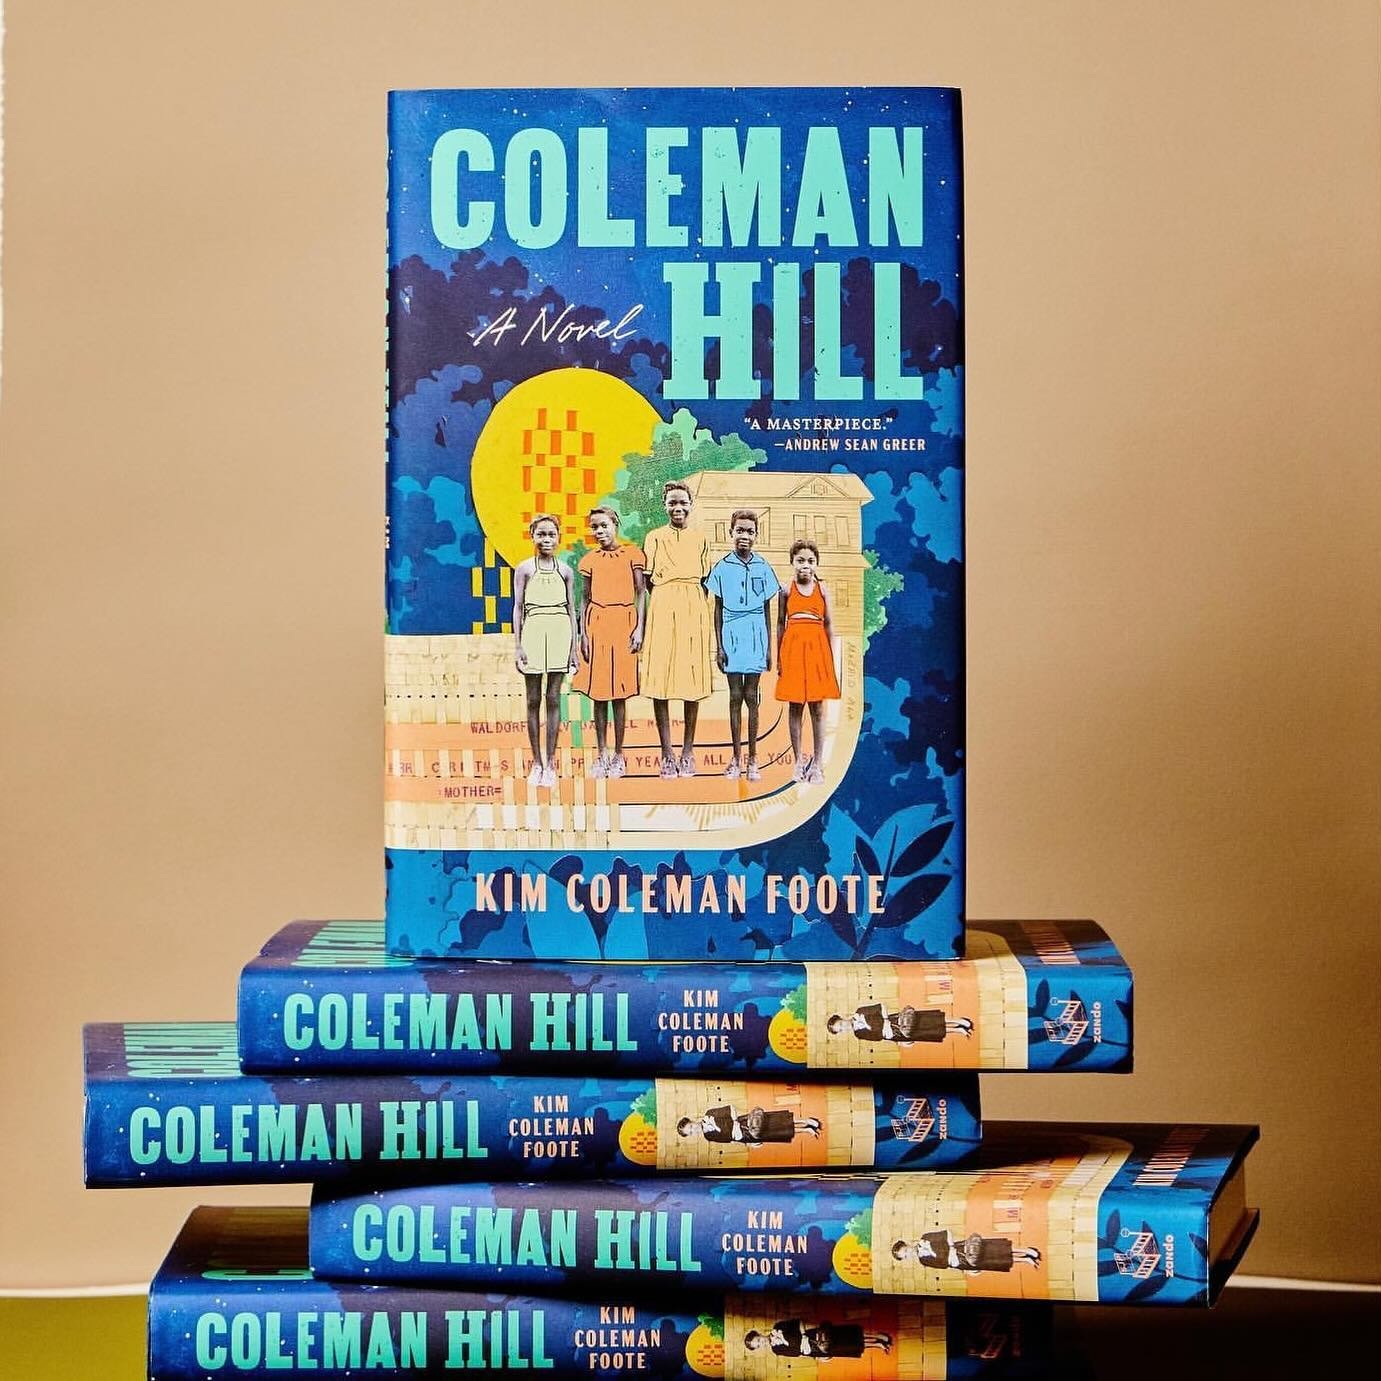 COLEMAN HILL is longlisted for the Carol Shields Prize for Fiction! Congratulations @kimcolemanfoote!

An exhilarating story of two American families whose fates become intertwined in the wake of the Great Migration. Braiding fact and fiction, it is 